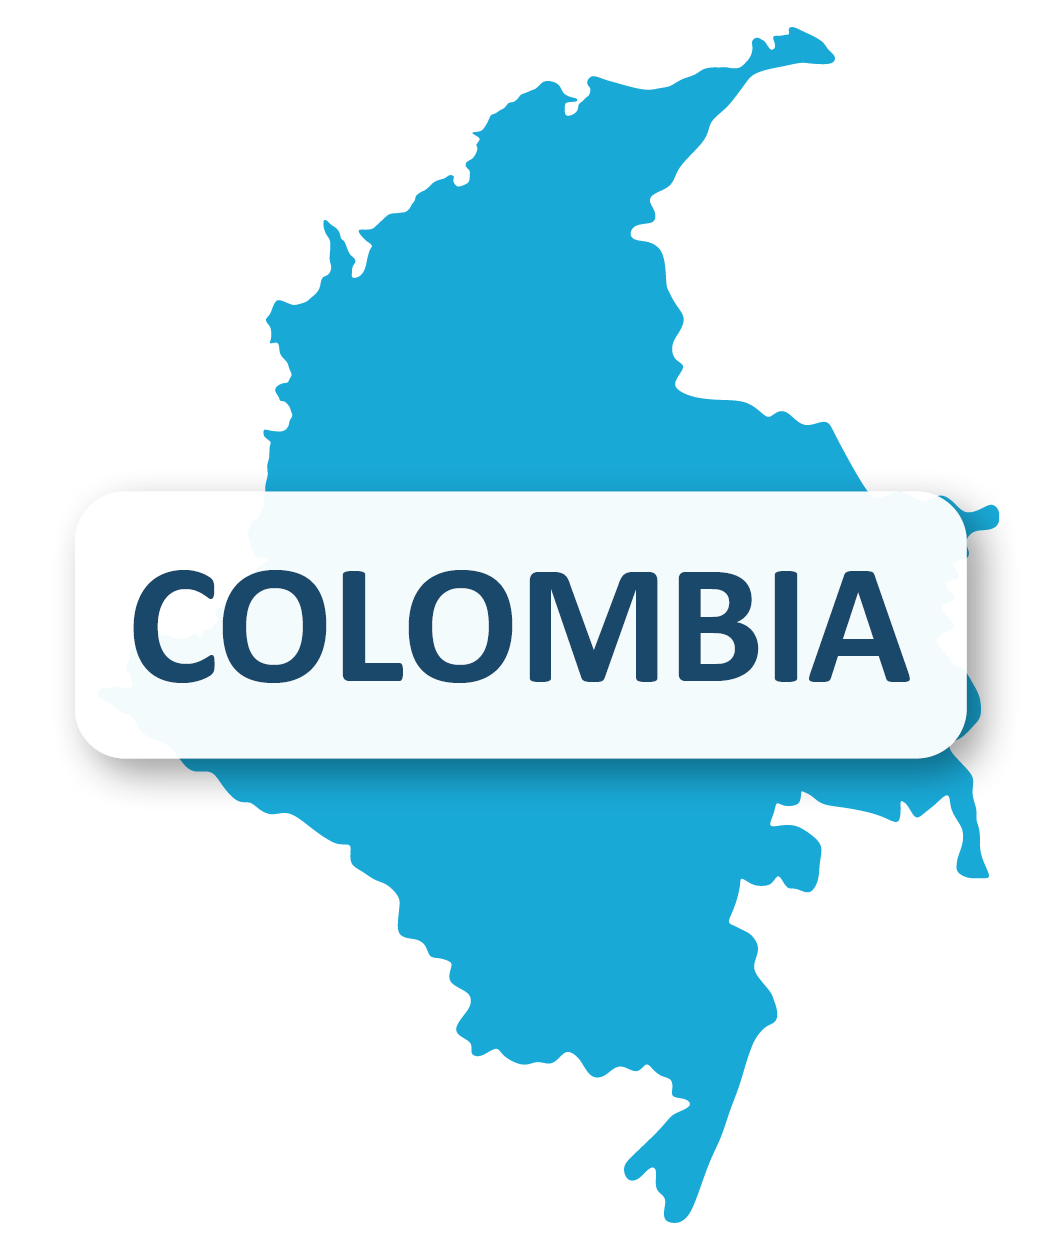 Colombia map outline with text 'Colombia'